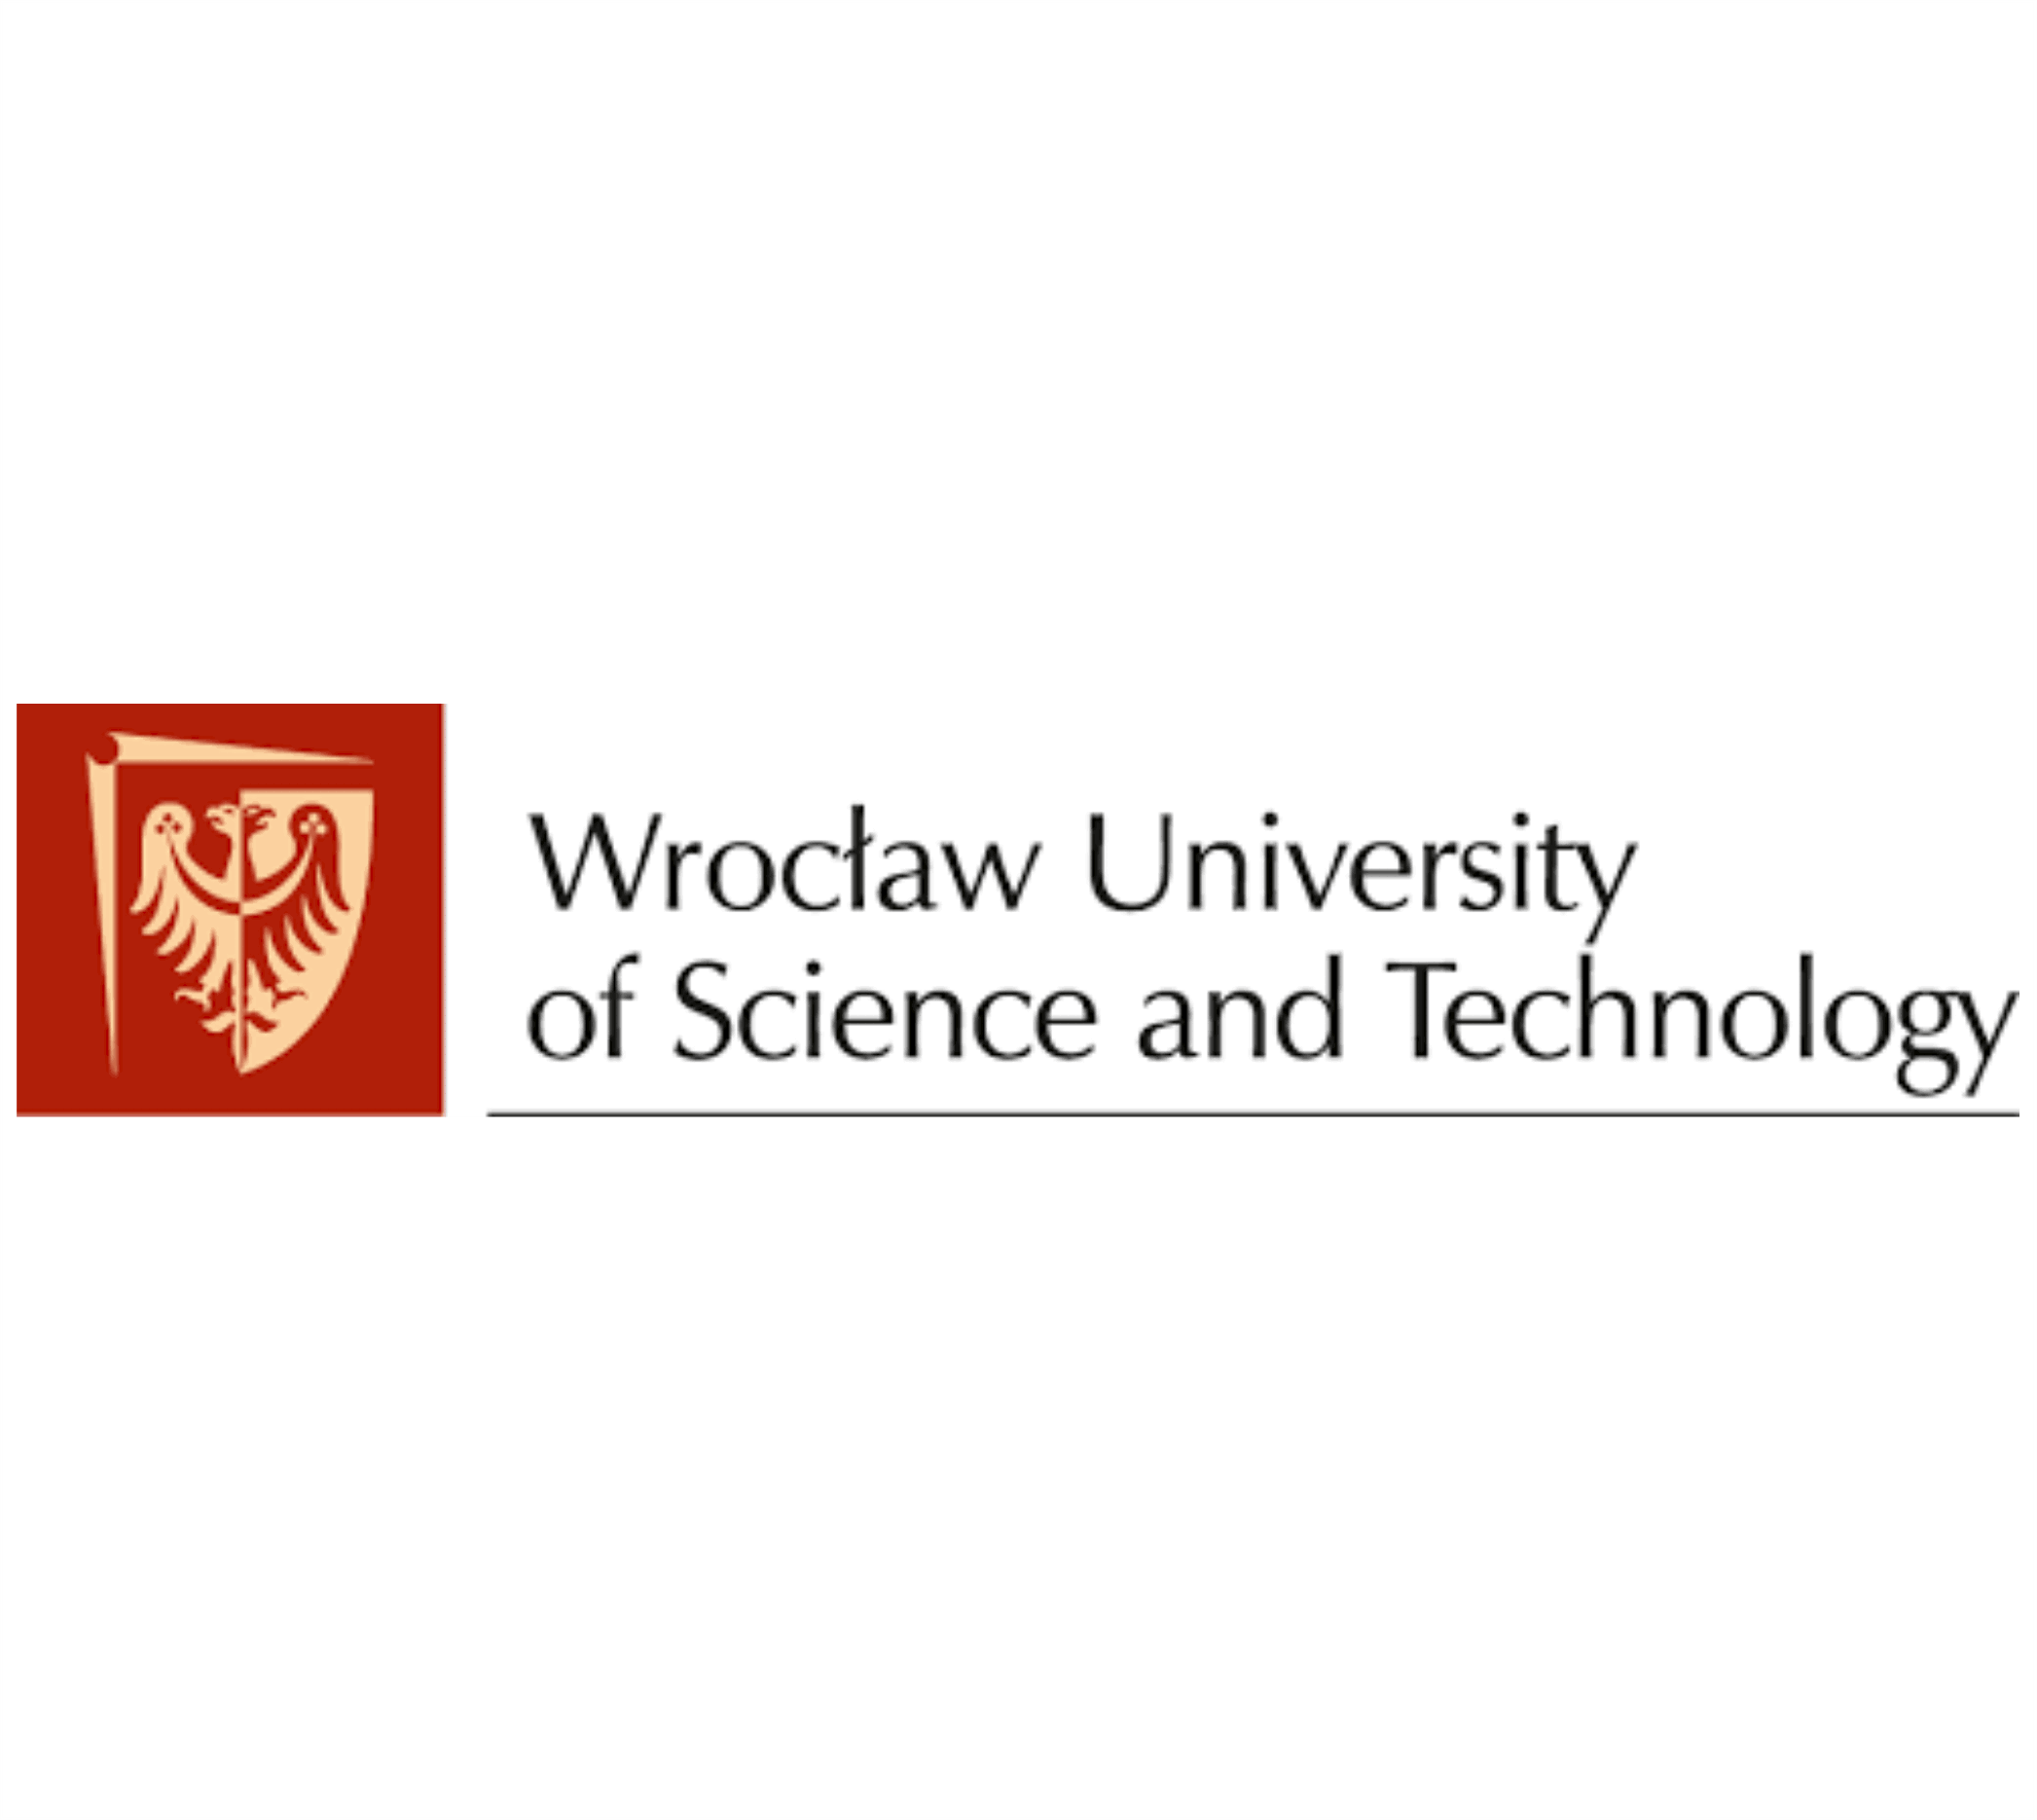 Best Graduate Student of Wroclaw University of Science and Technology